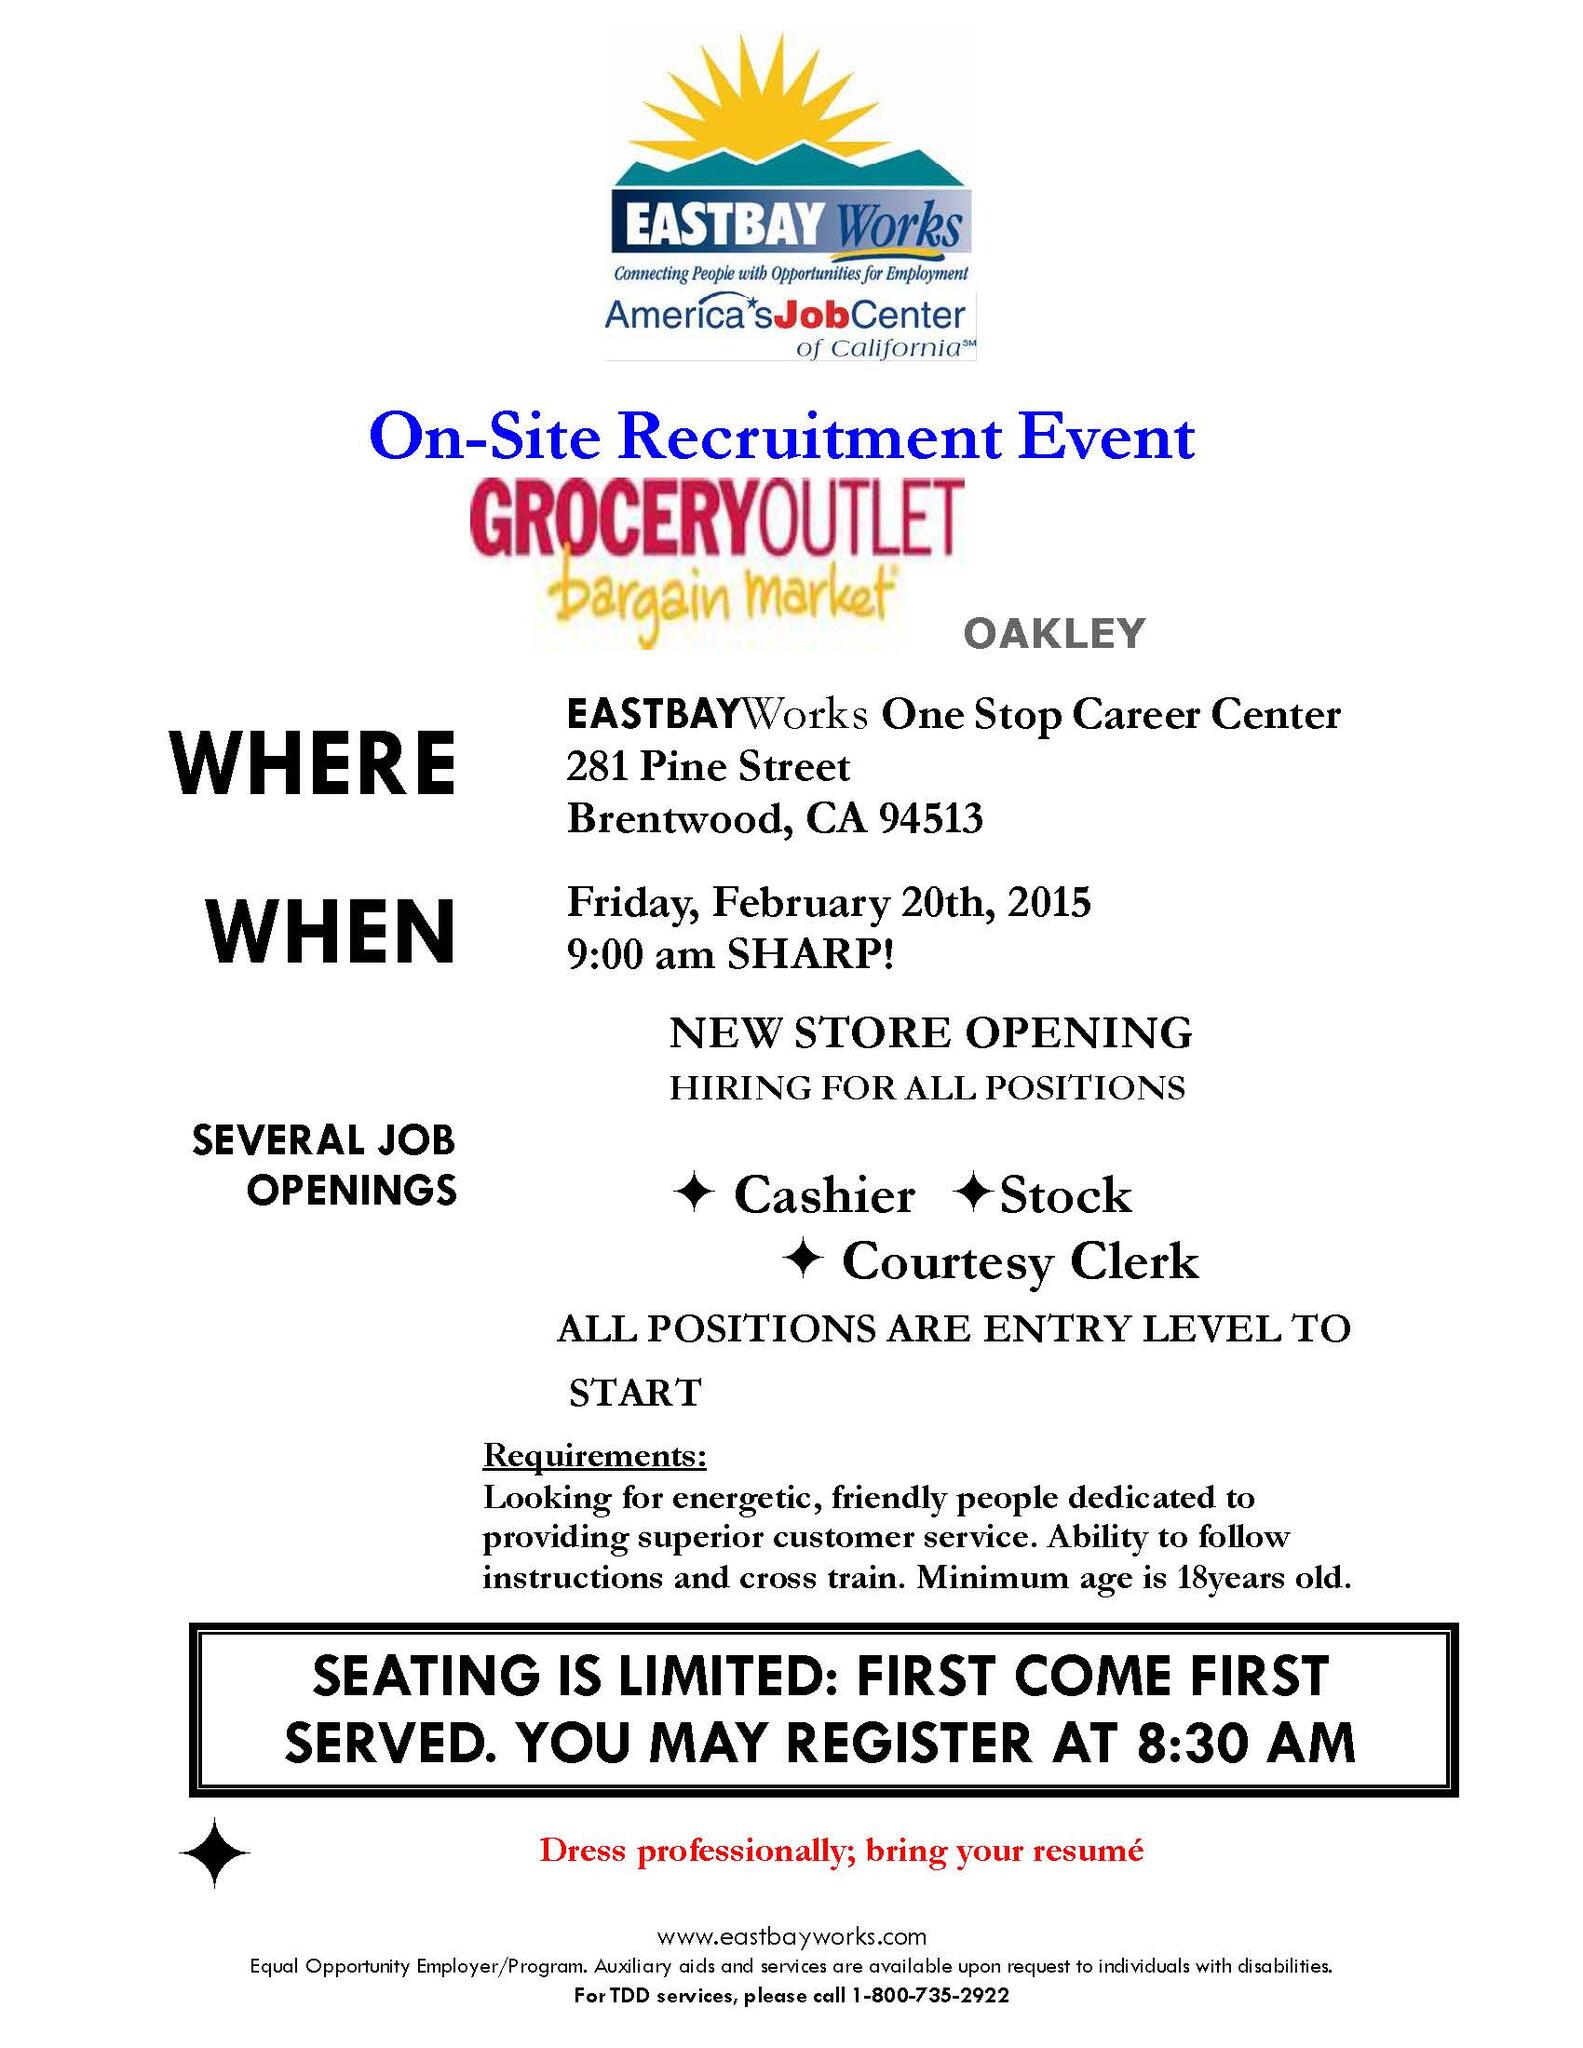 Grocery Outlet Hiring for Oakley's New 